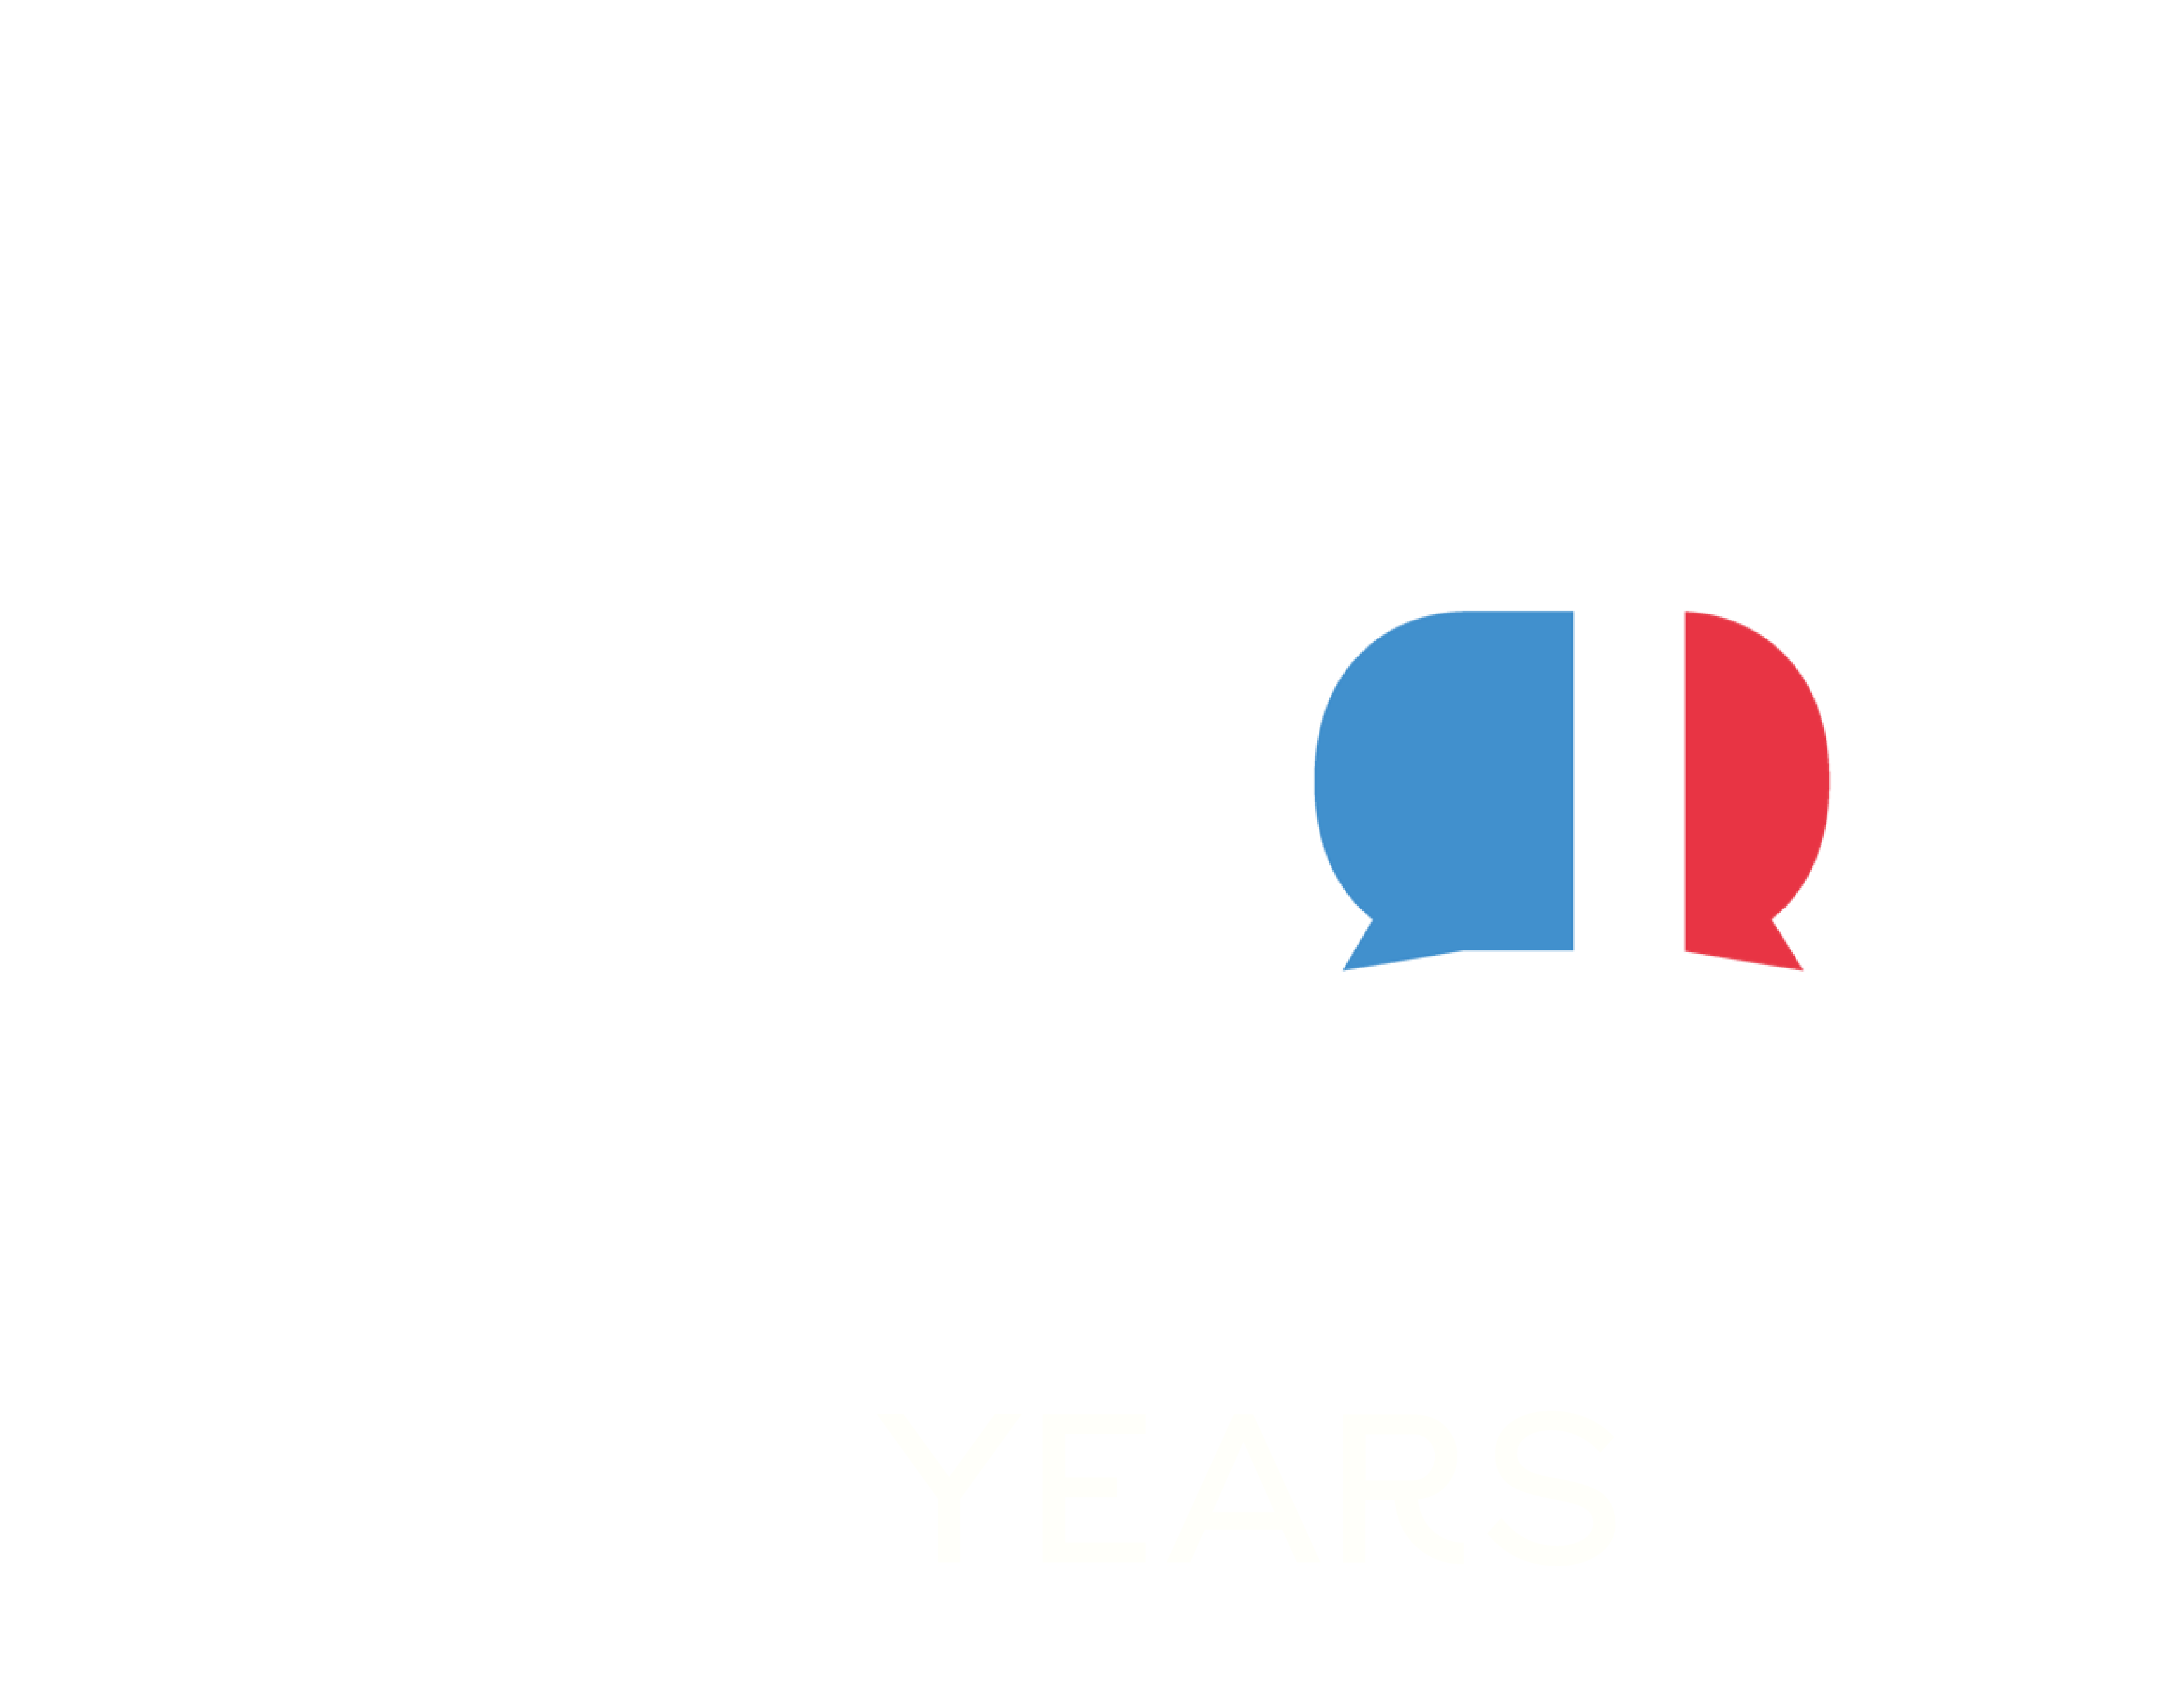 ReD - 10 years